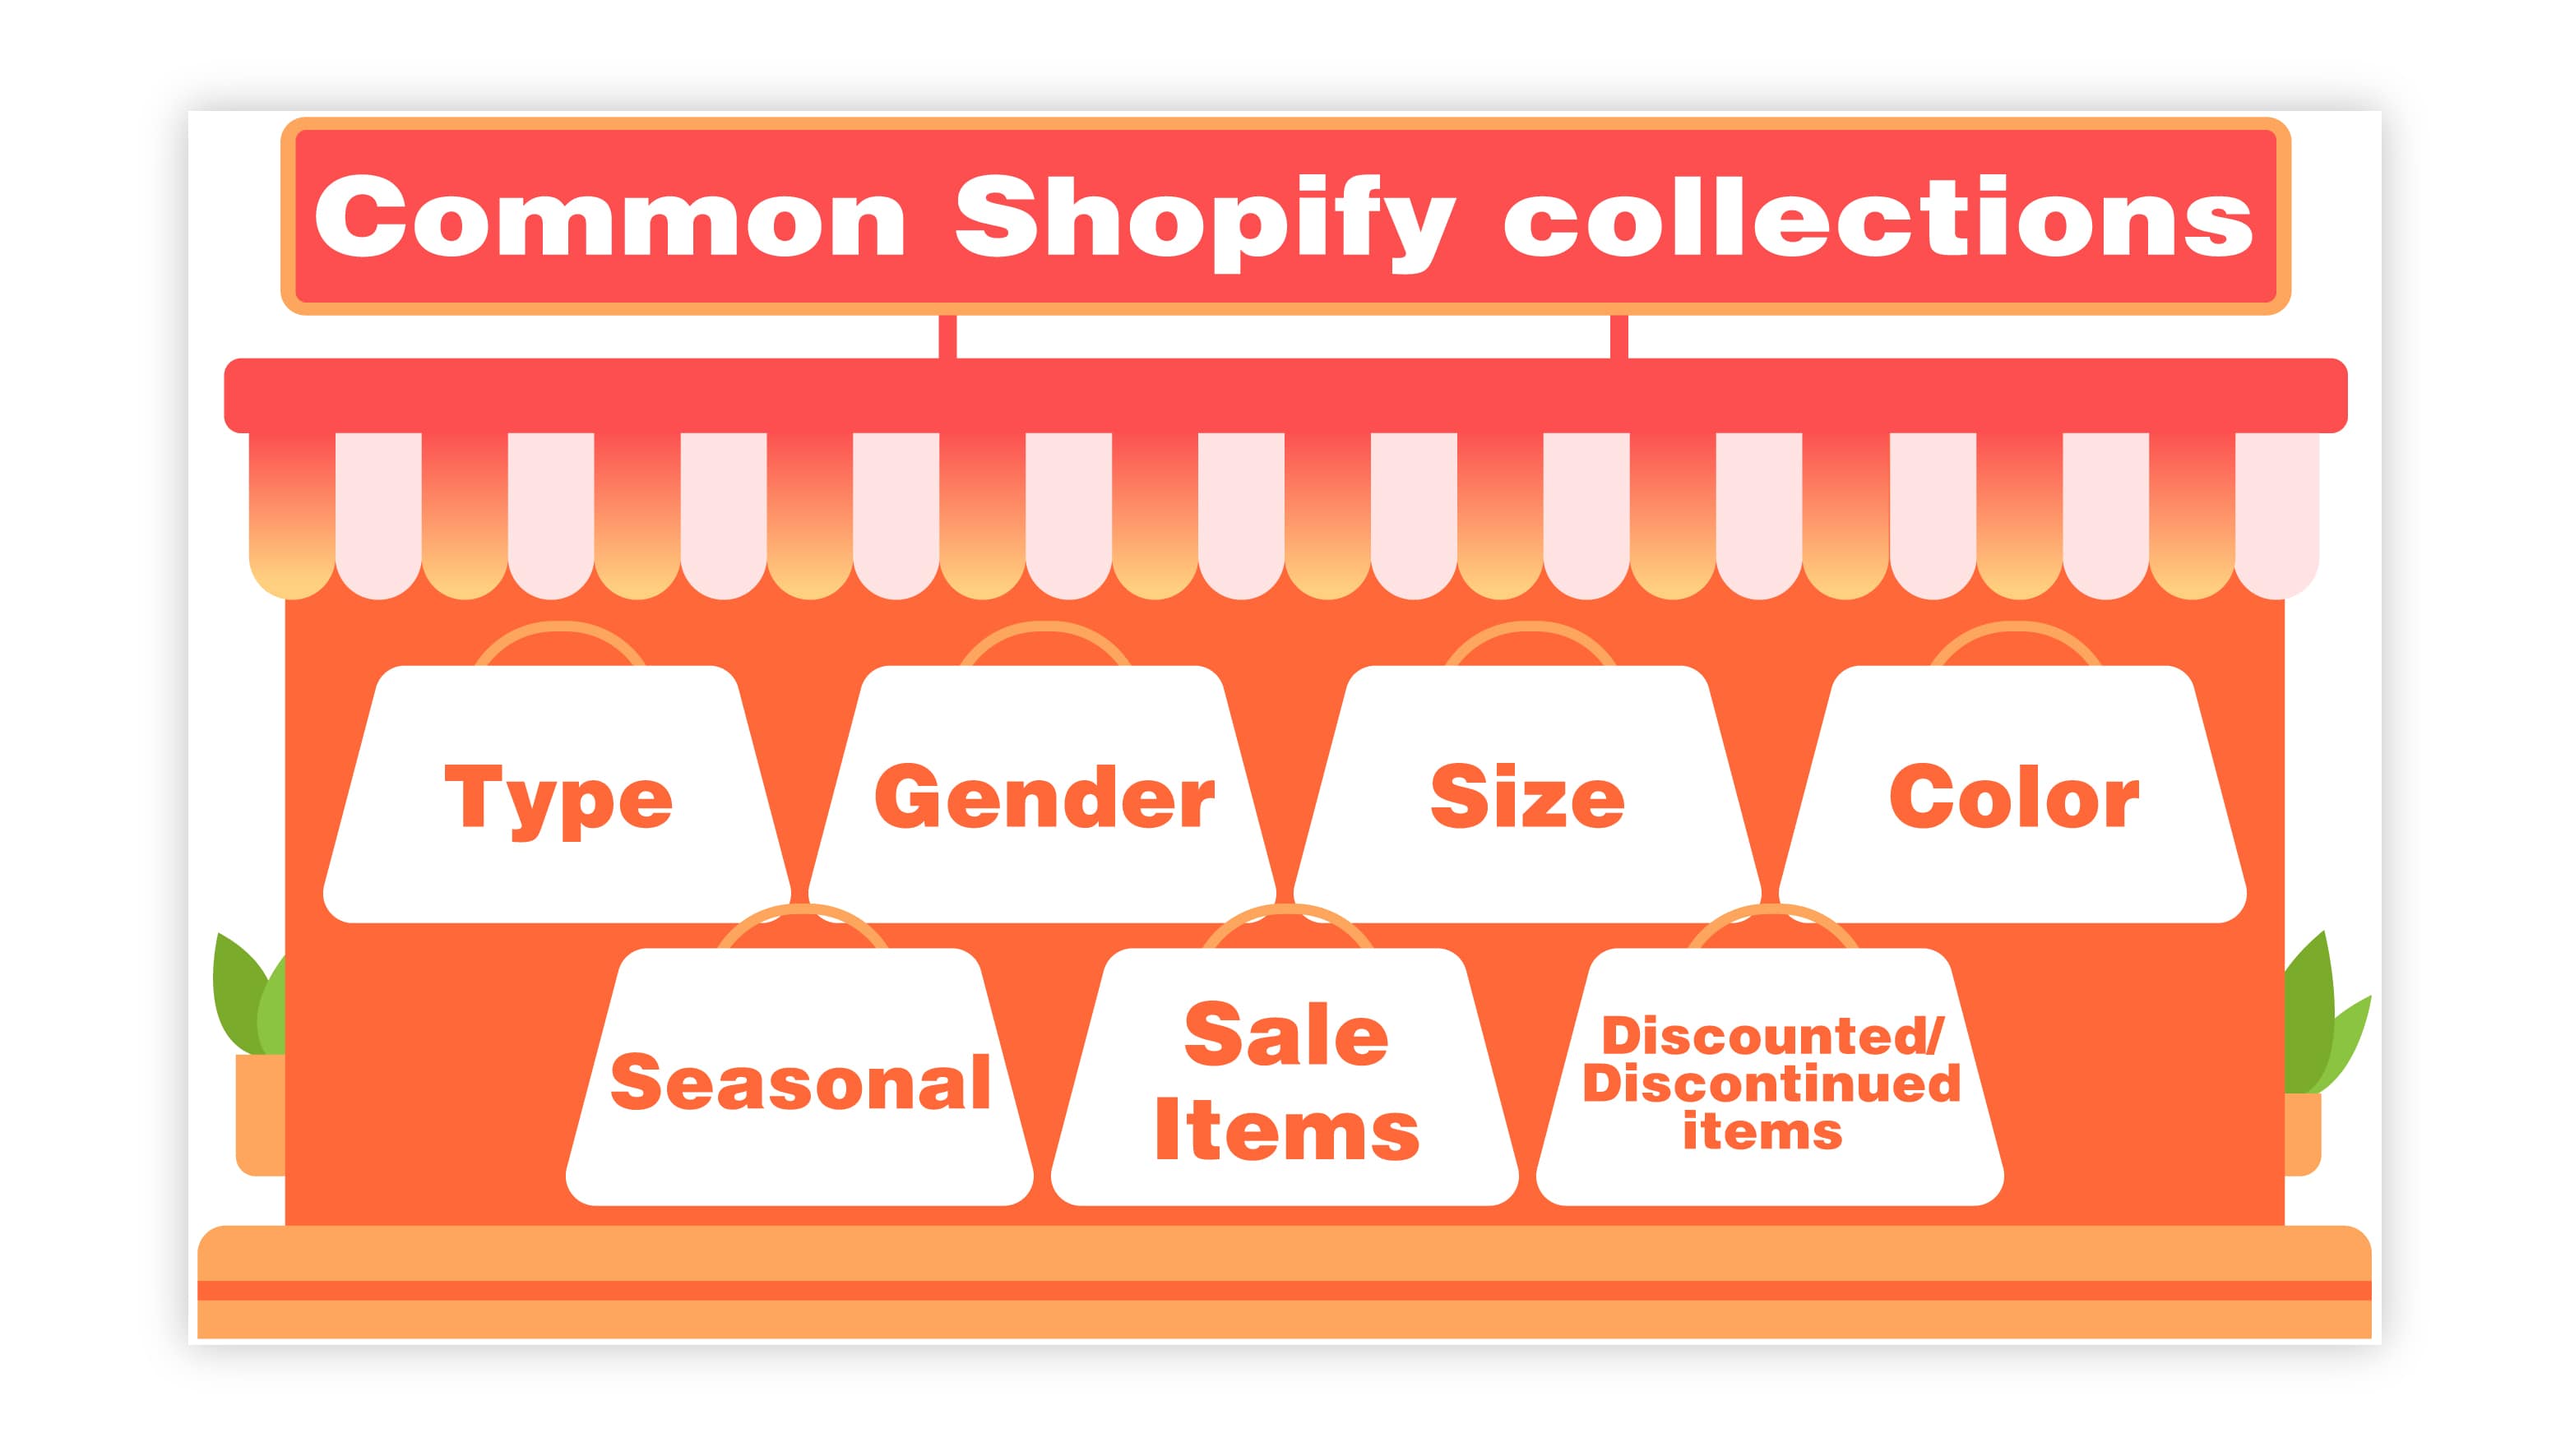 4 - Common Shopify collections